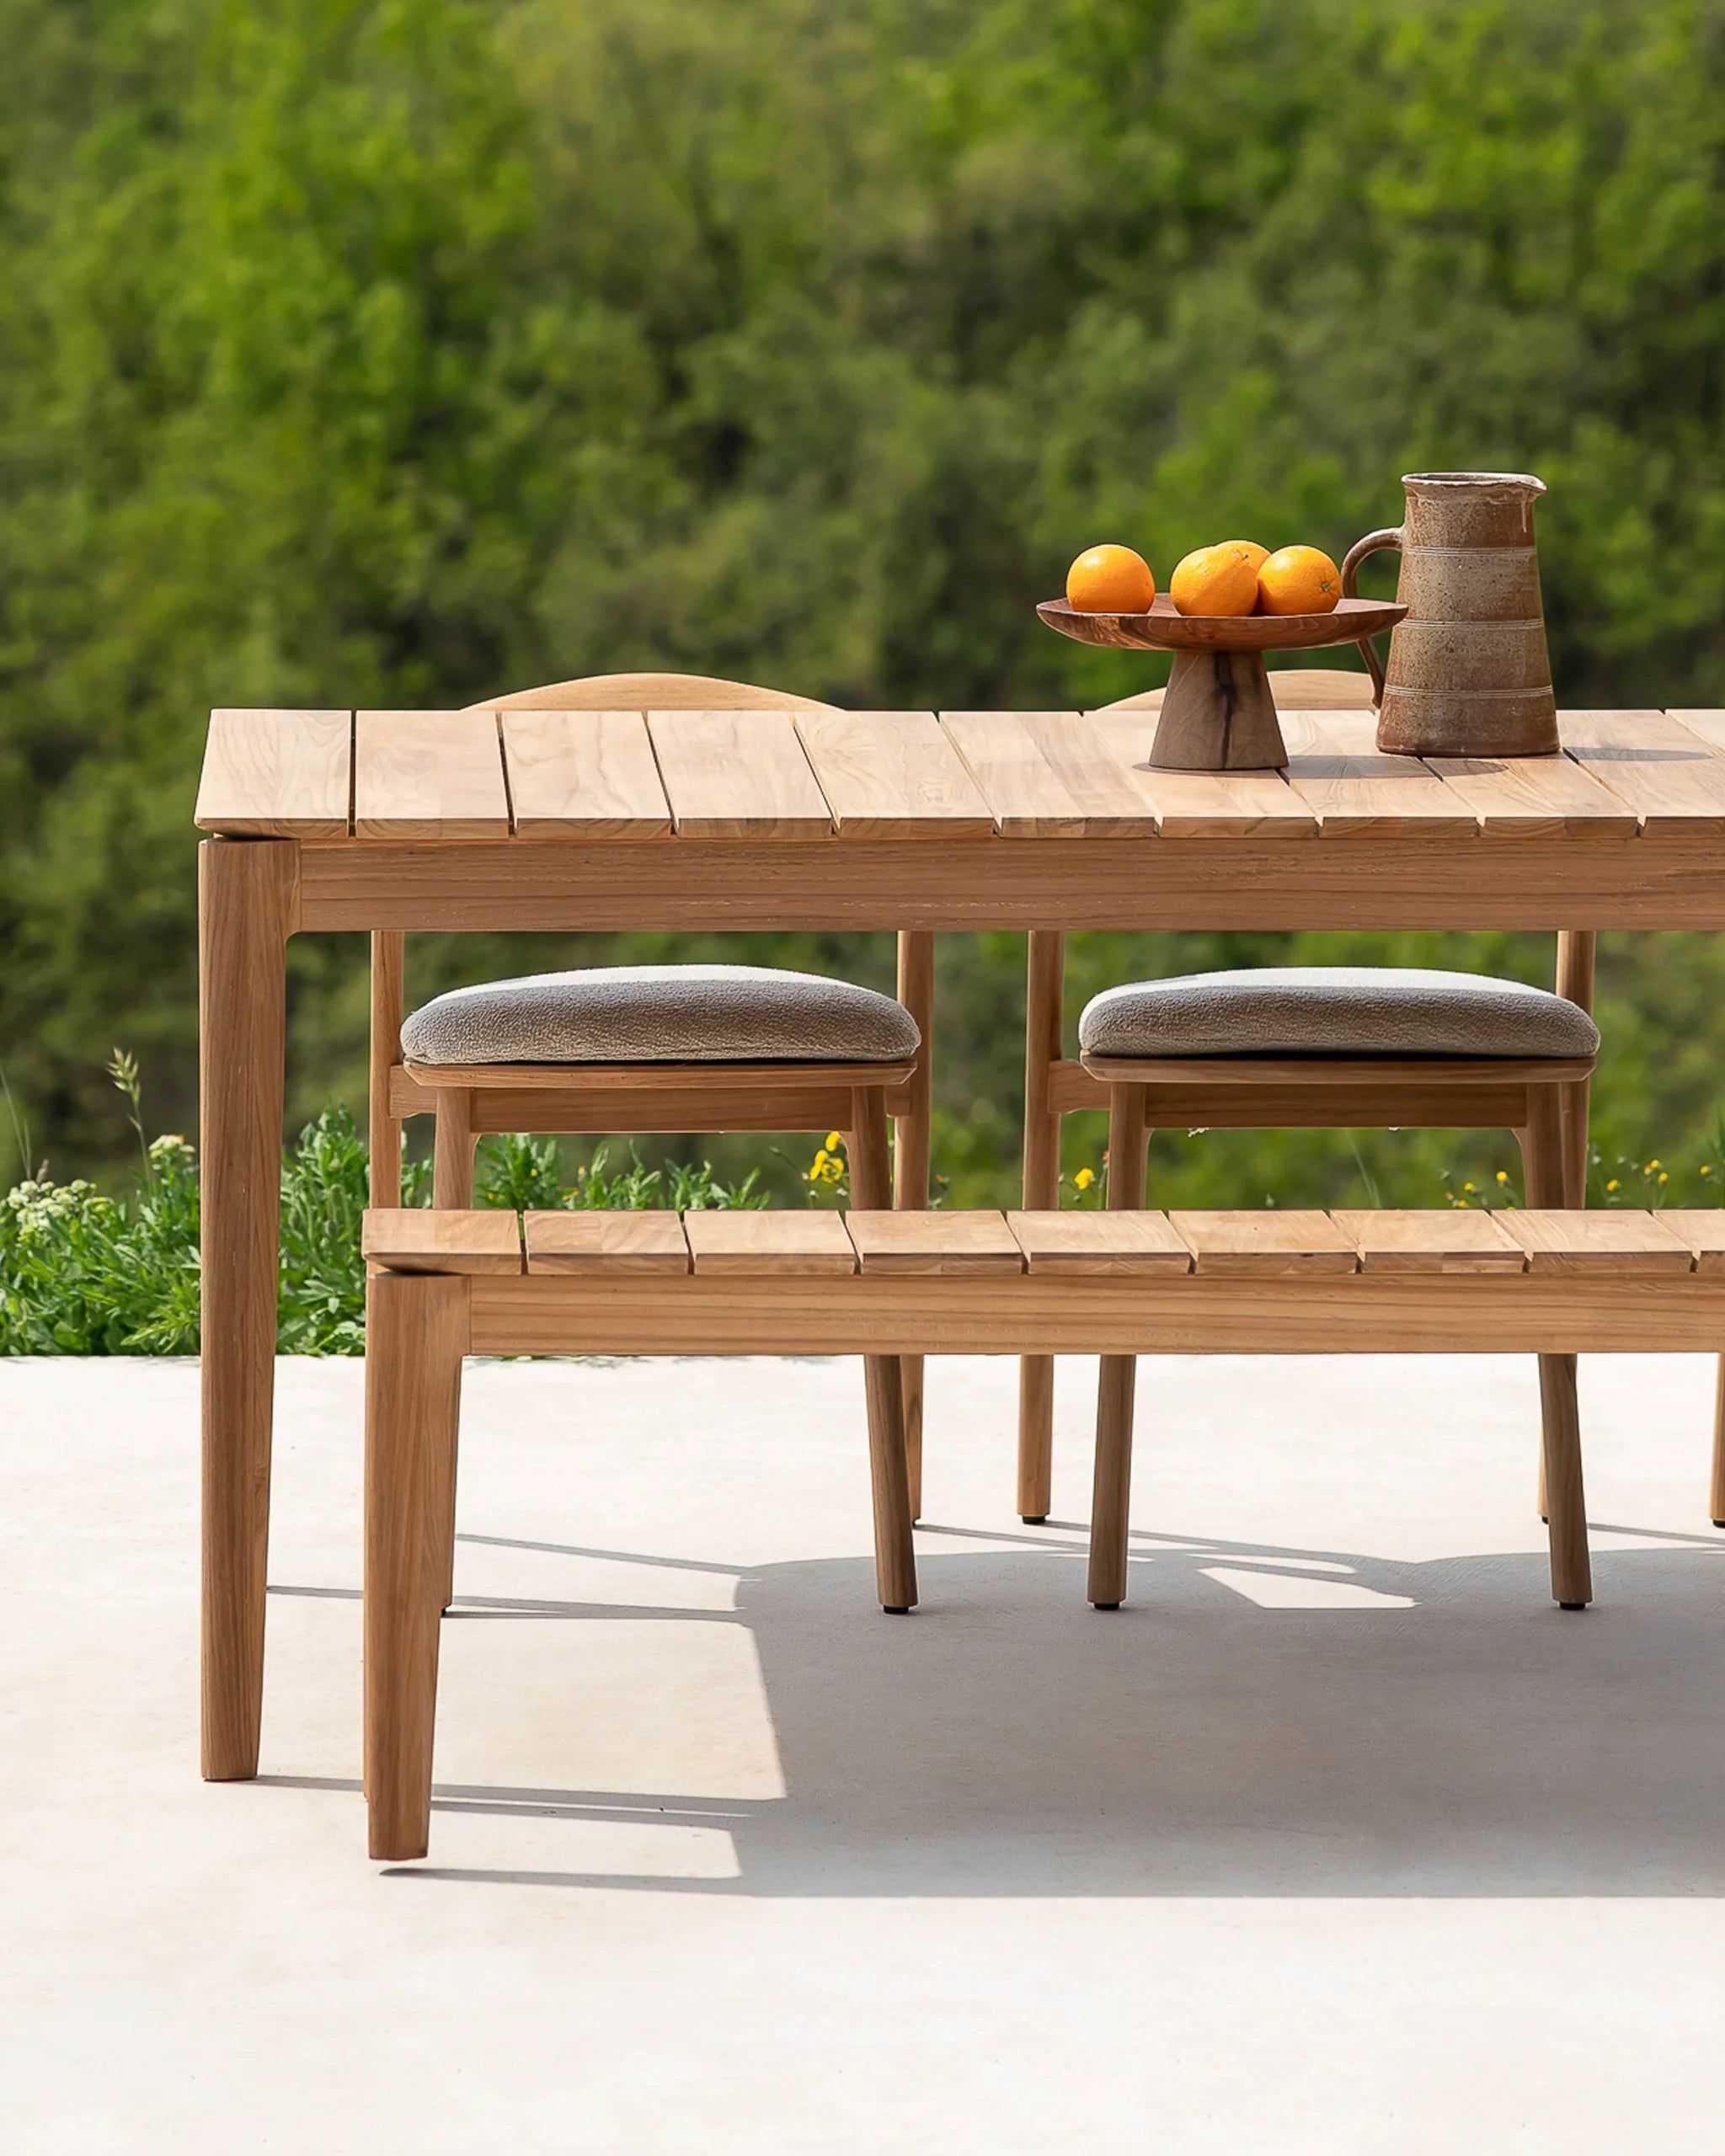 The Beauty and Durability of Timber Outdoor Furniture